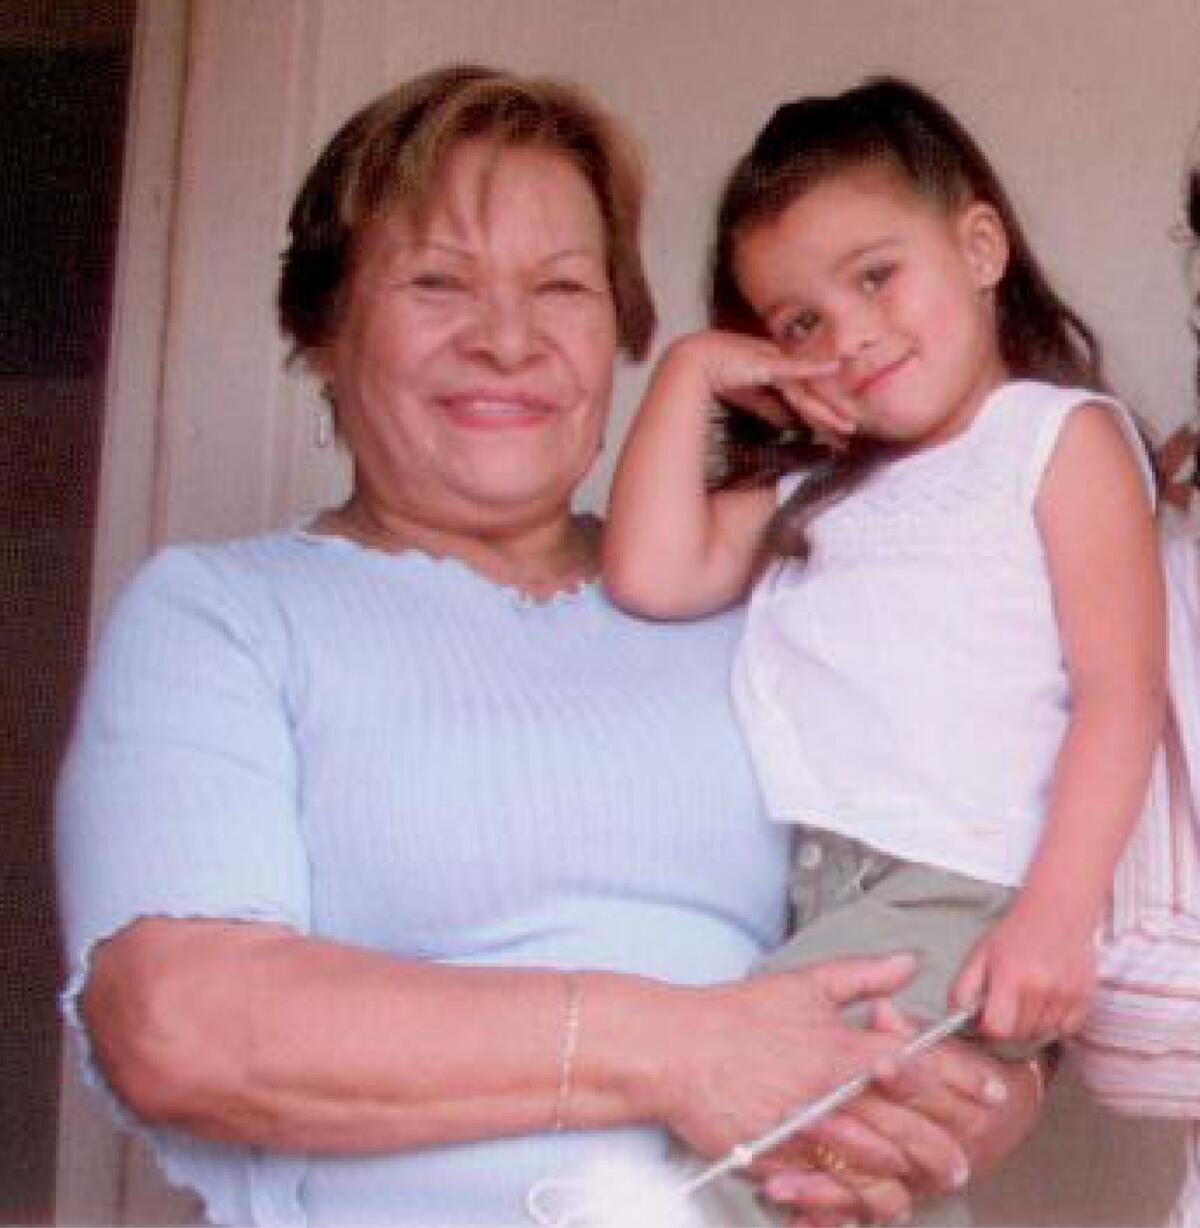 Isidra Huizar, pictured with one of her granddaughters, on a mailer for Jose Huizar's 2005 campaign.